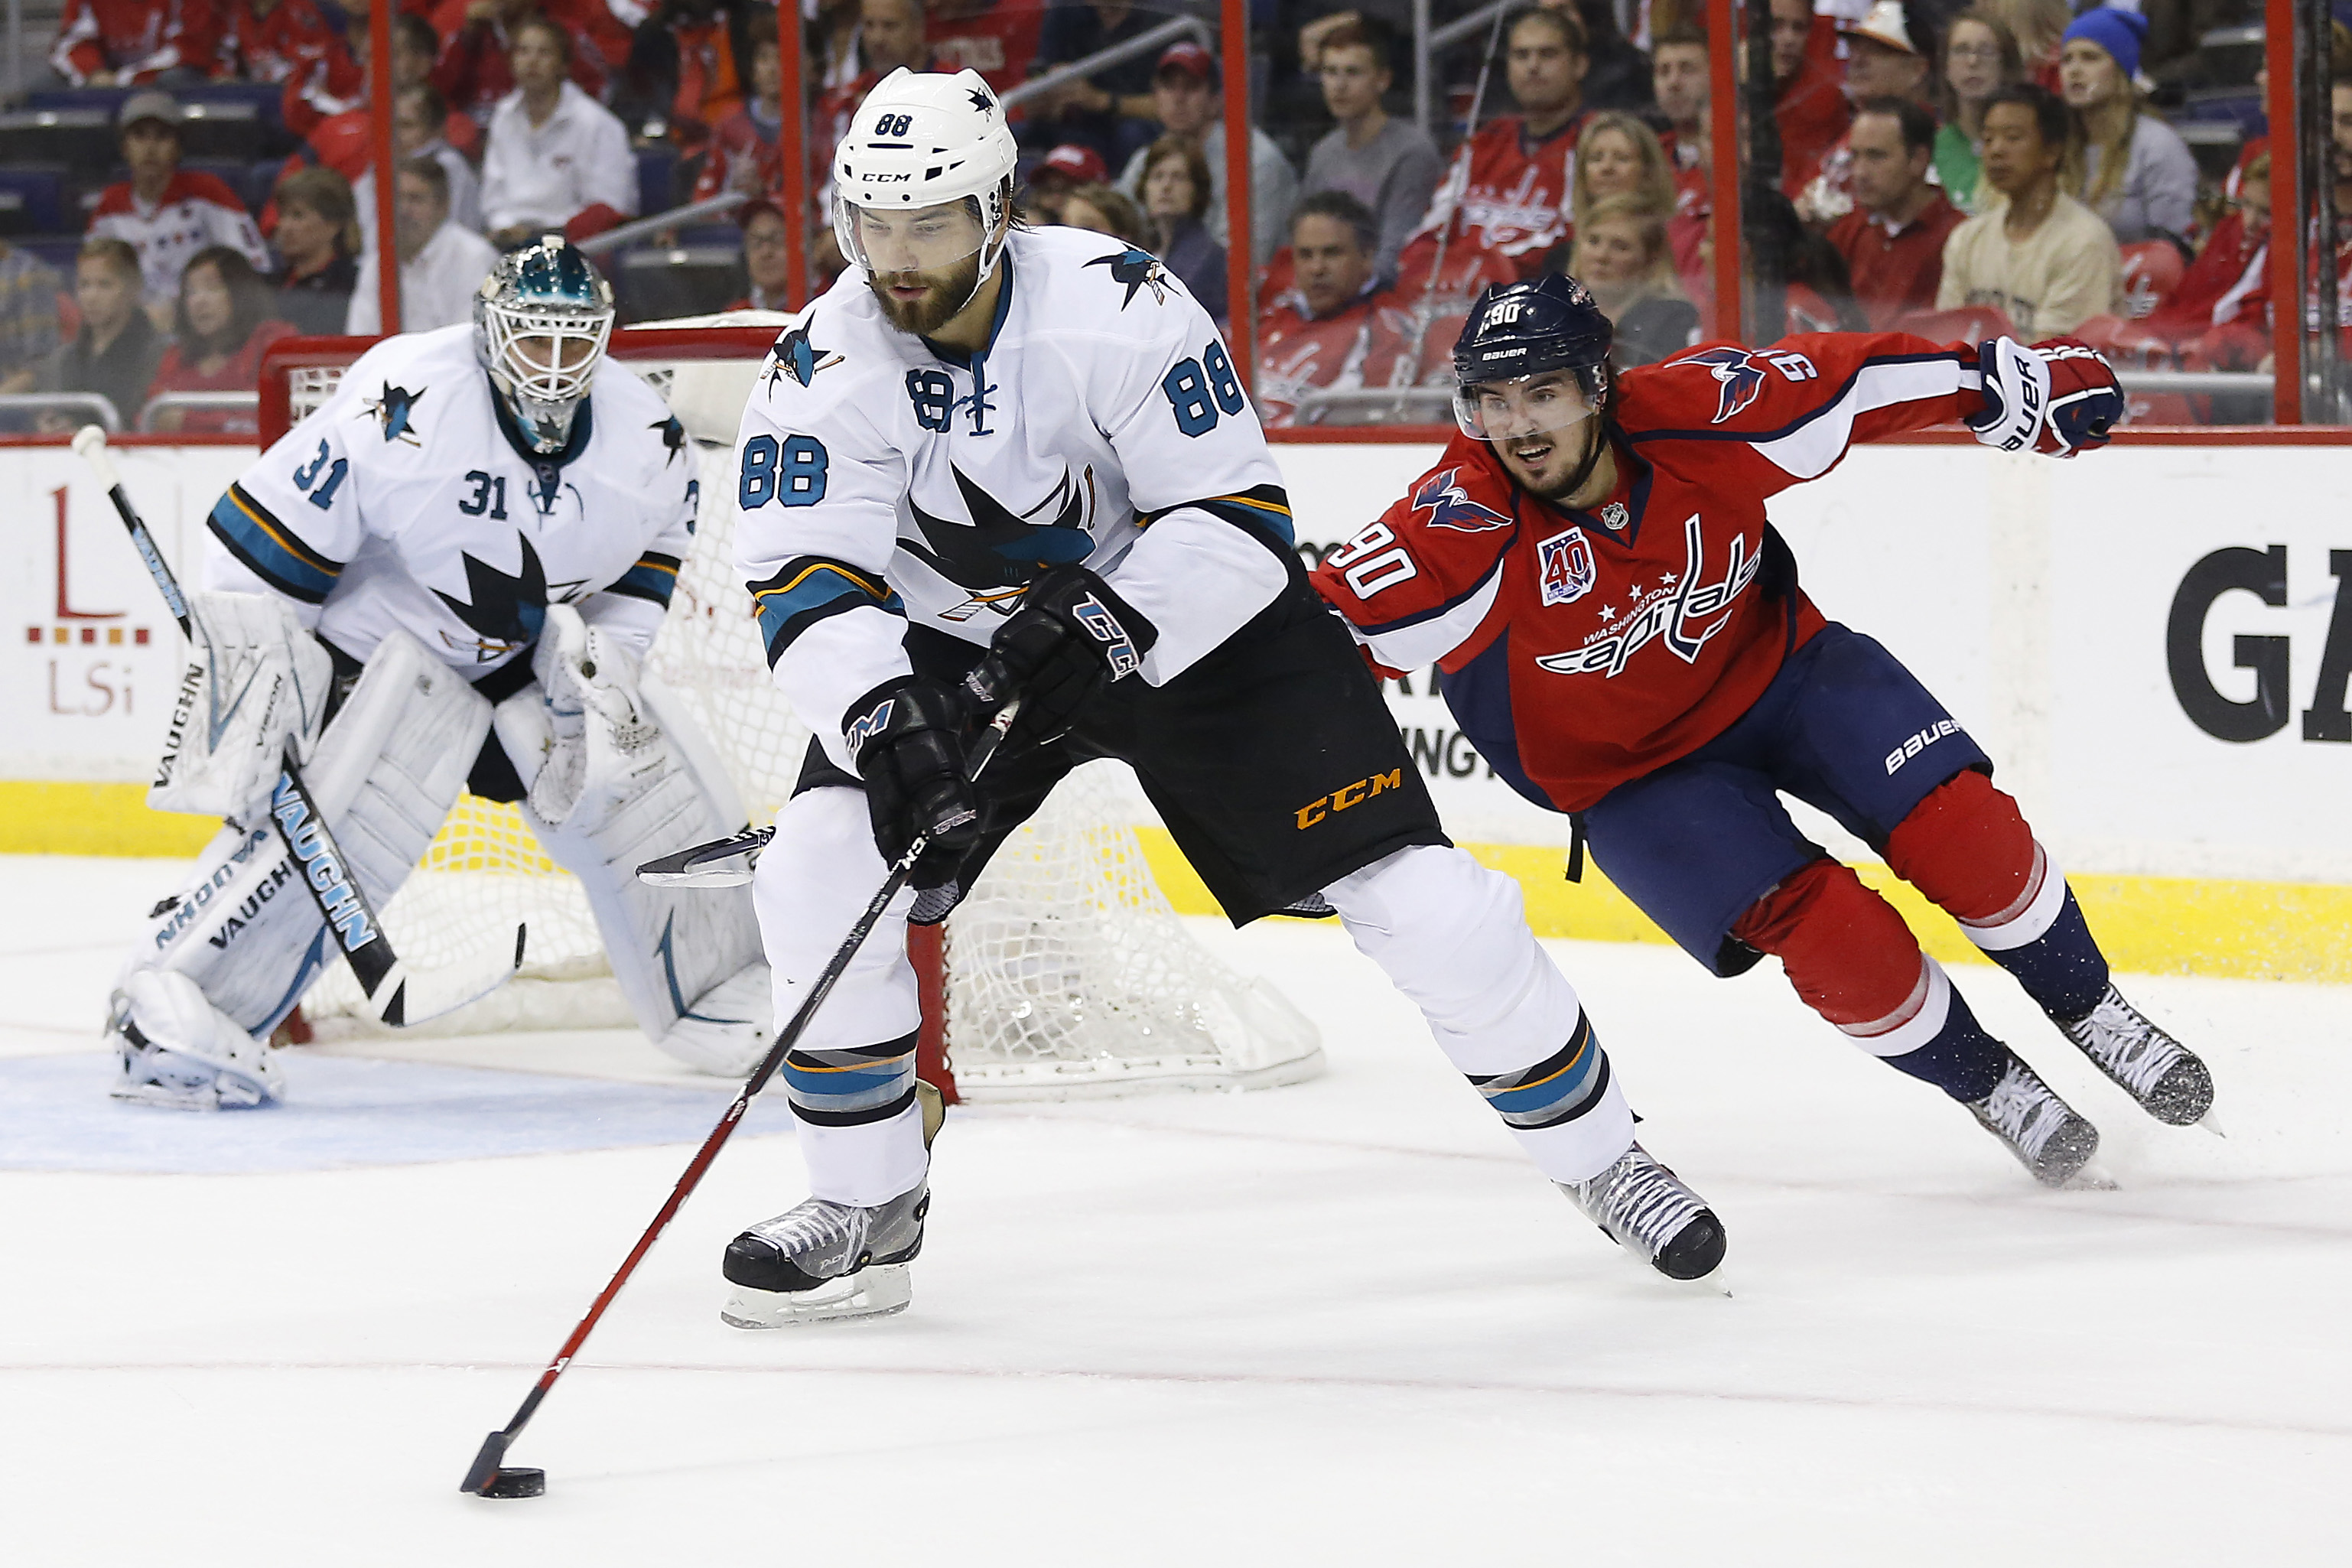 San Jose's Brent Burns has moved back to his original position on defense. (Geoff Burke, USA TODAY Sports)